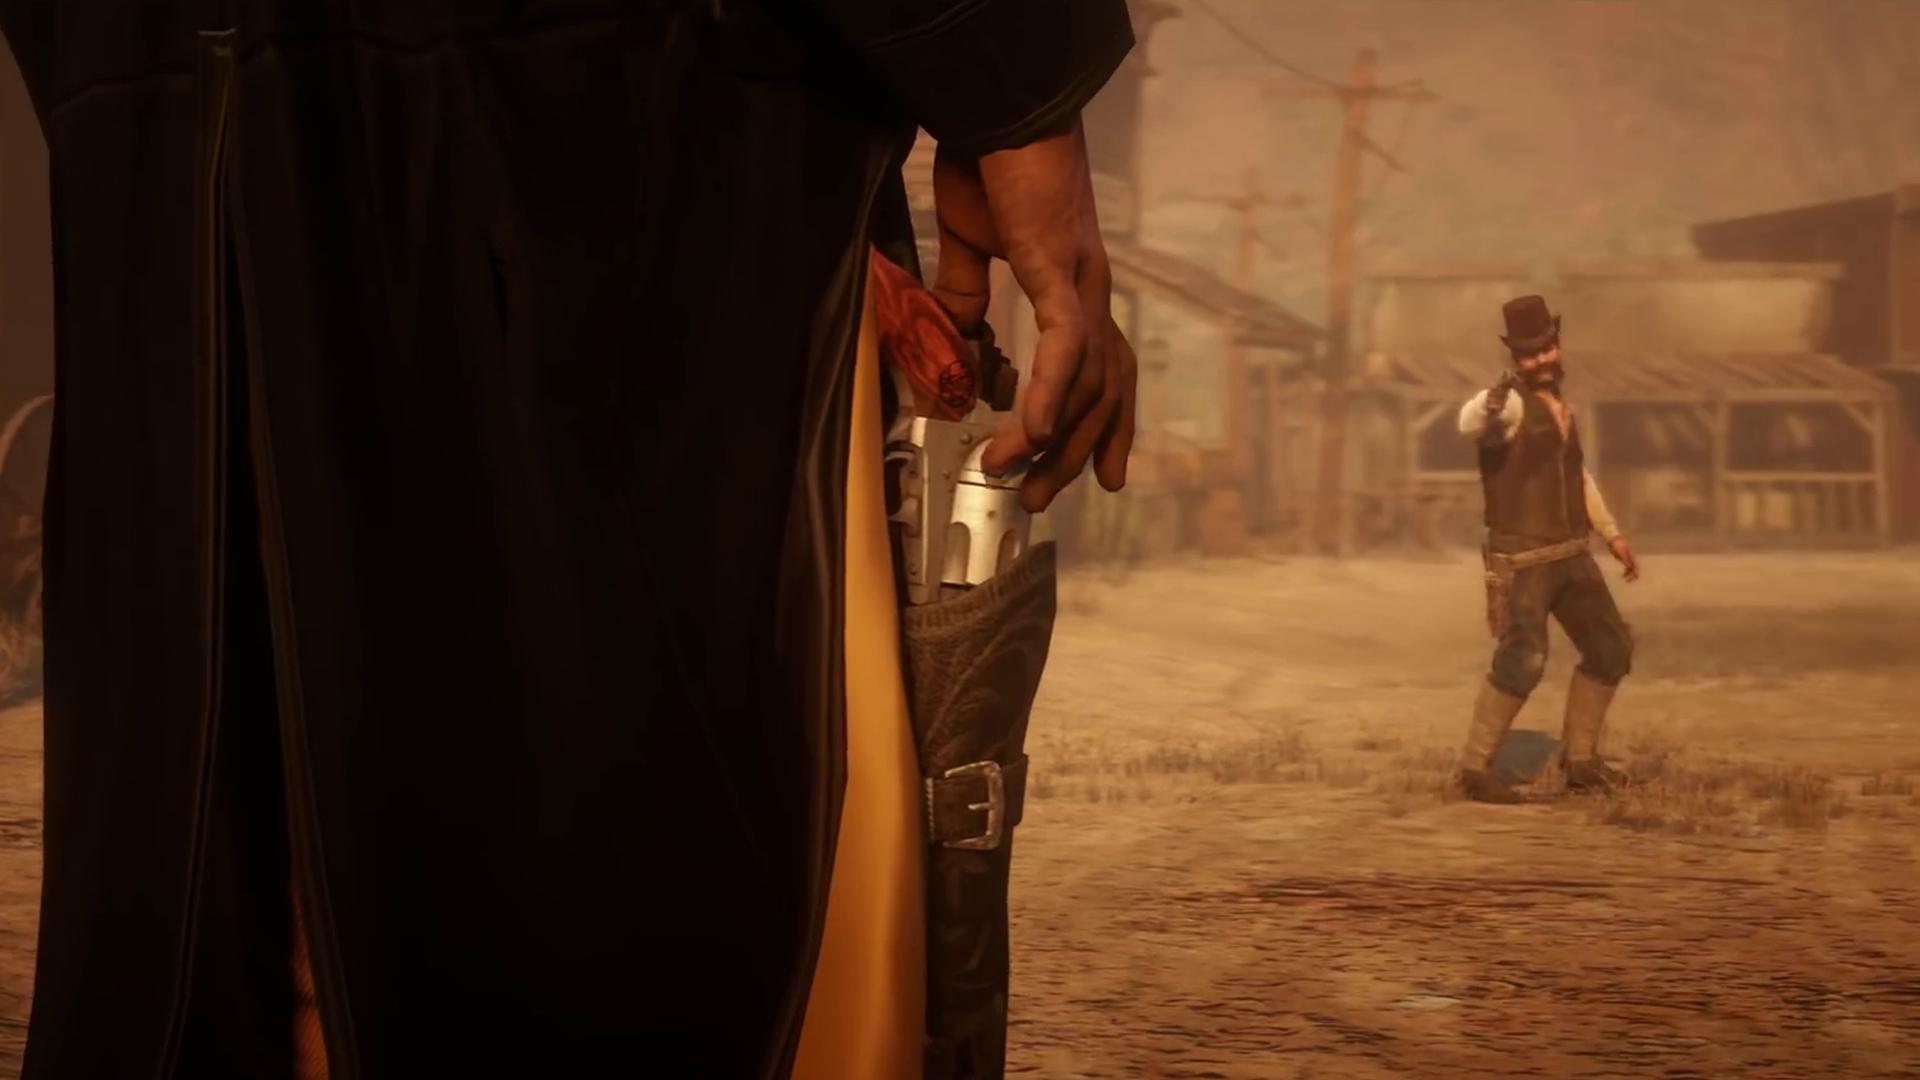 images/red-dead-redemption-2/articles/rdo-full-experience-article-duels-first-content-update-trailer-screenshot.jpg